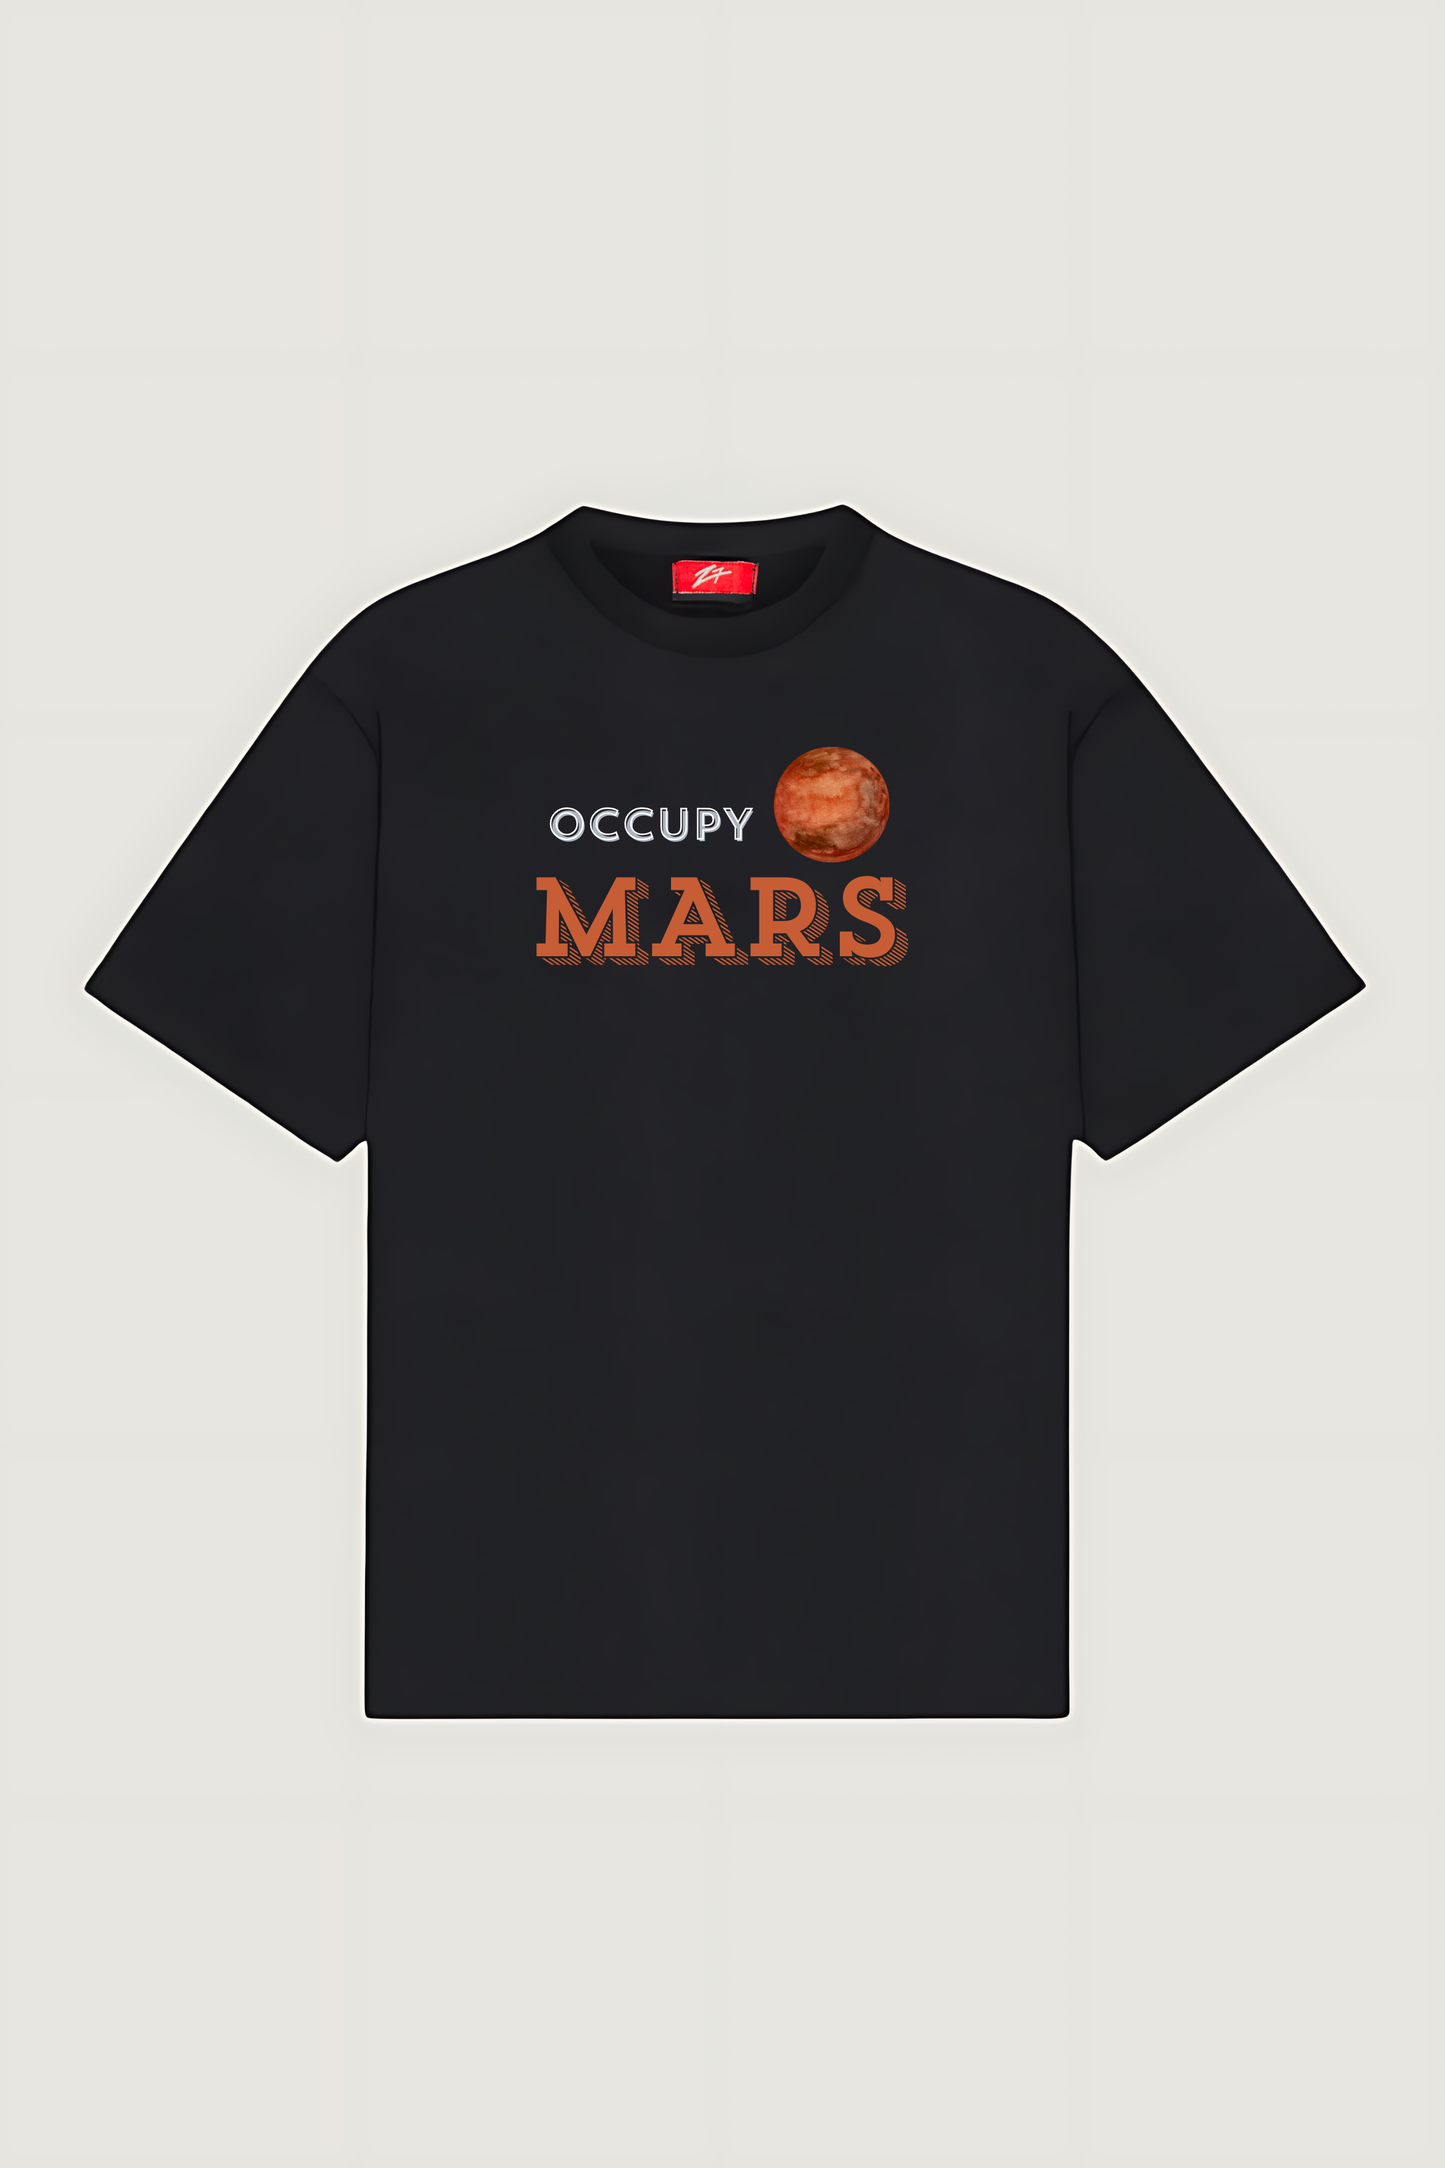 Occupy Mars’ Oversized Tee - A Must-Have for Space Lovers.